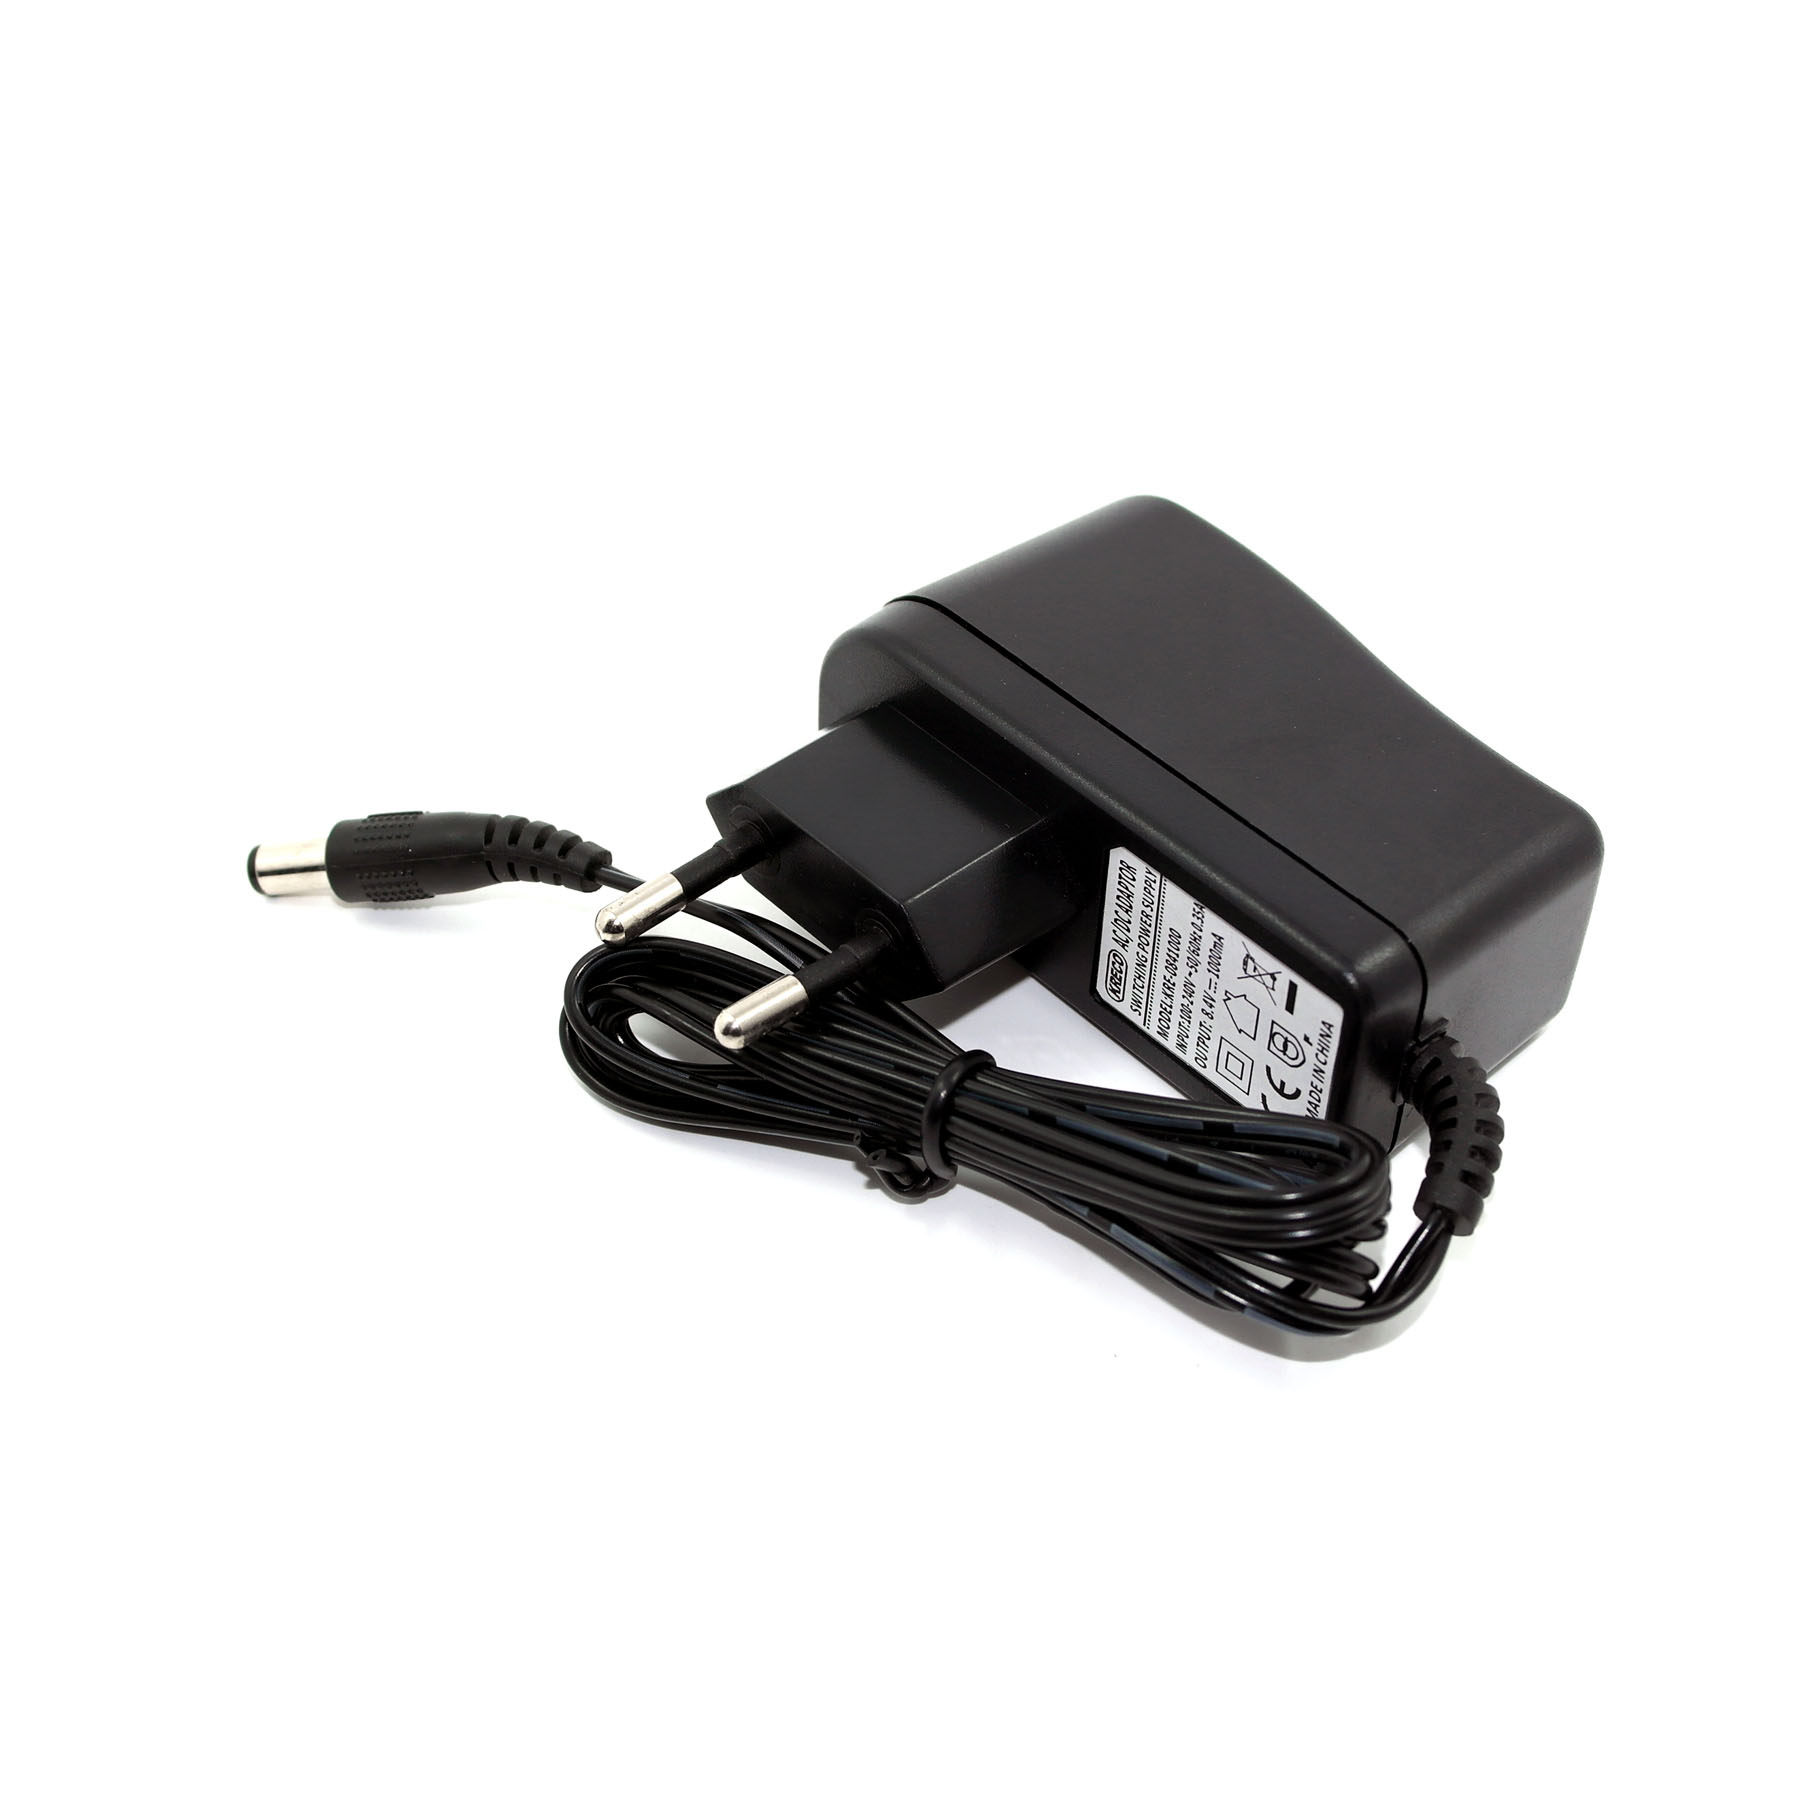 8.4V 1A power supply, 8.4V travel charger, adapter